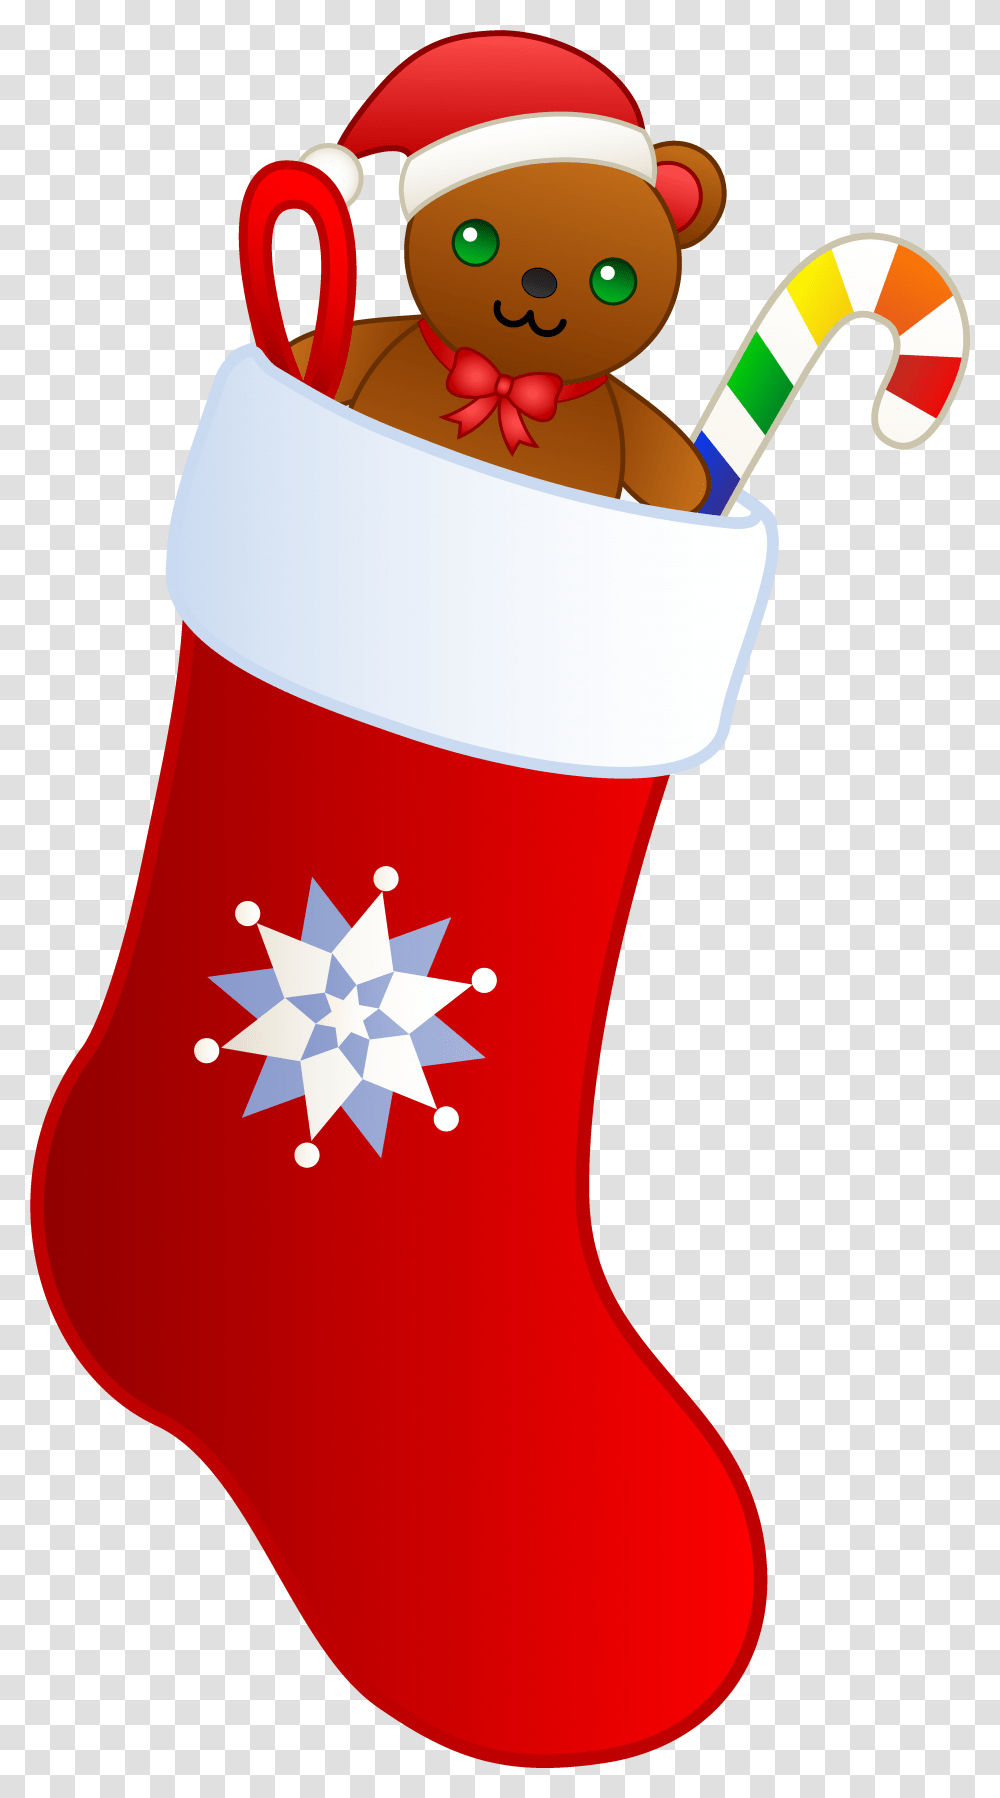 Christmas Stocking With Teddy Christmas Stocking Clipart Background, Gift, Ketchup, Food, Star Symbol Transparent Png